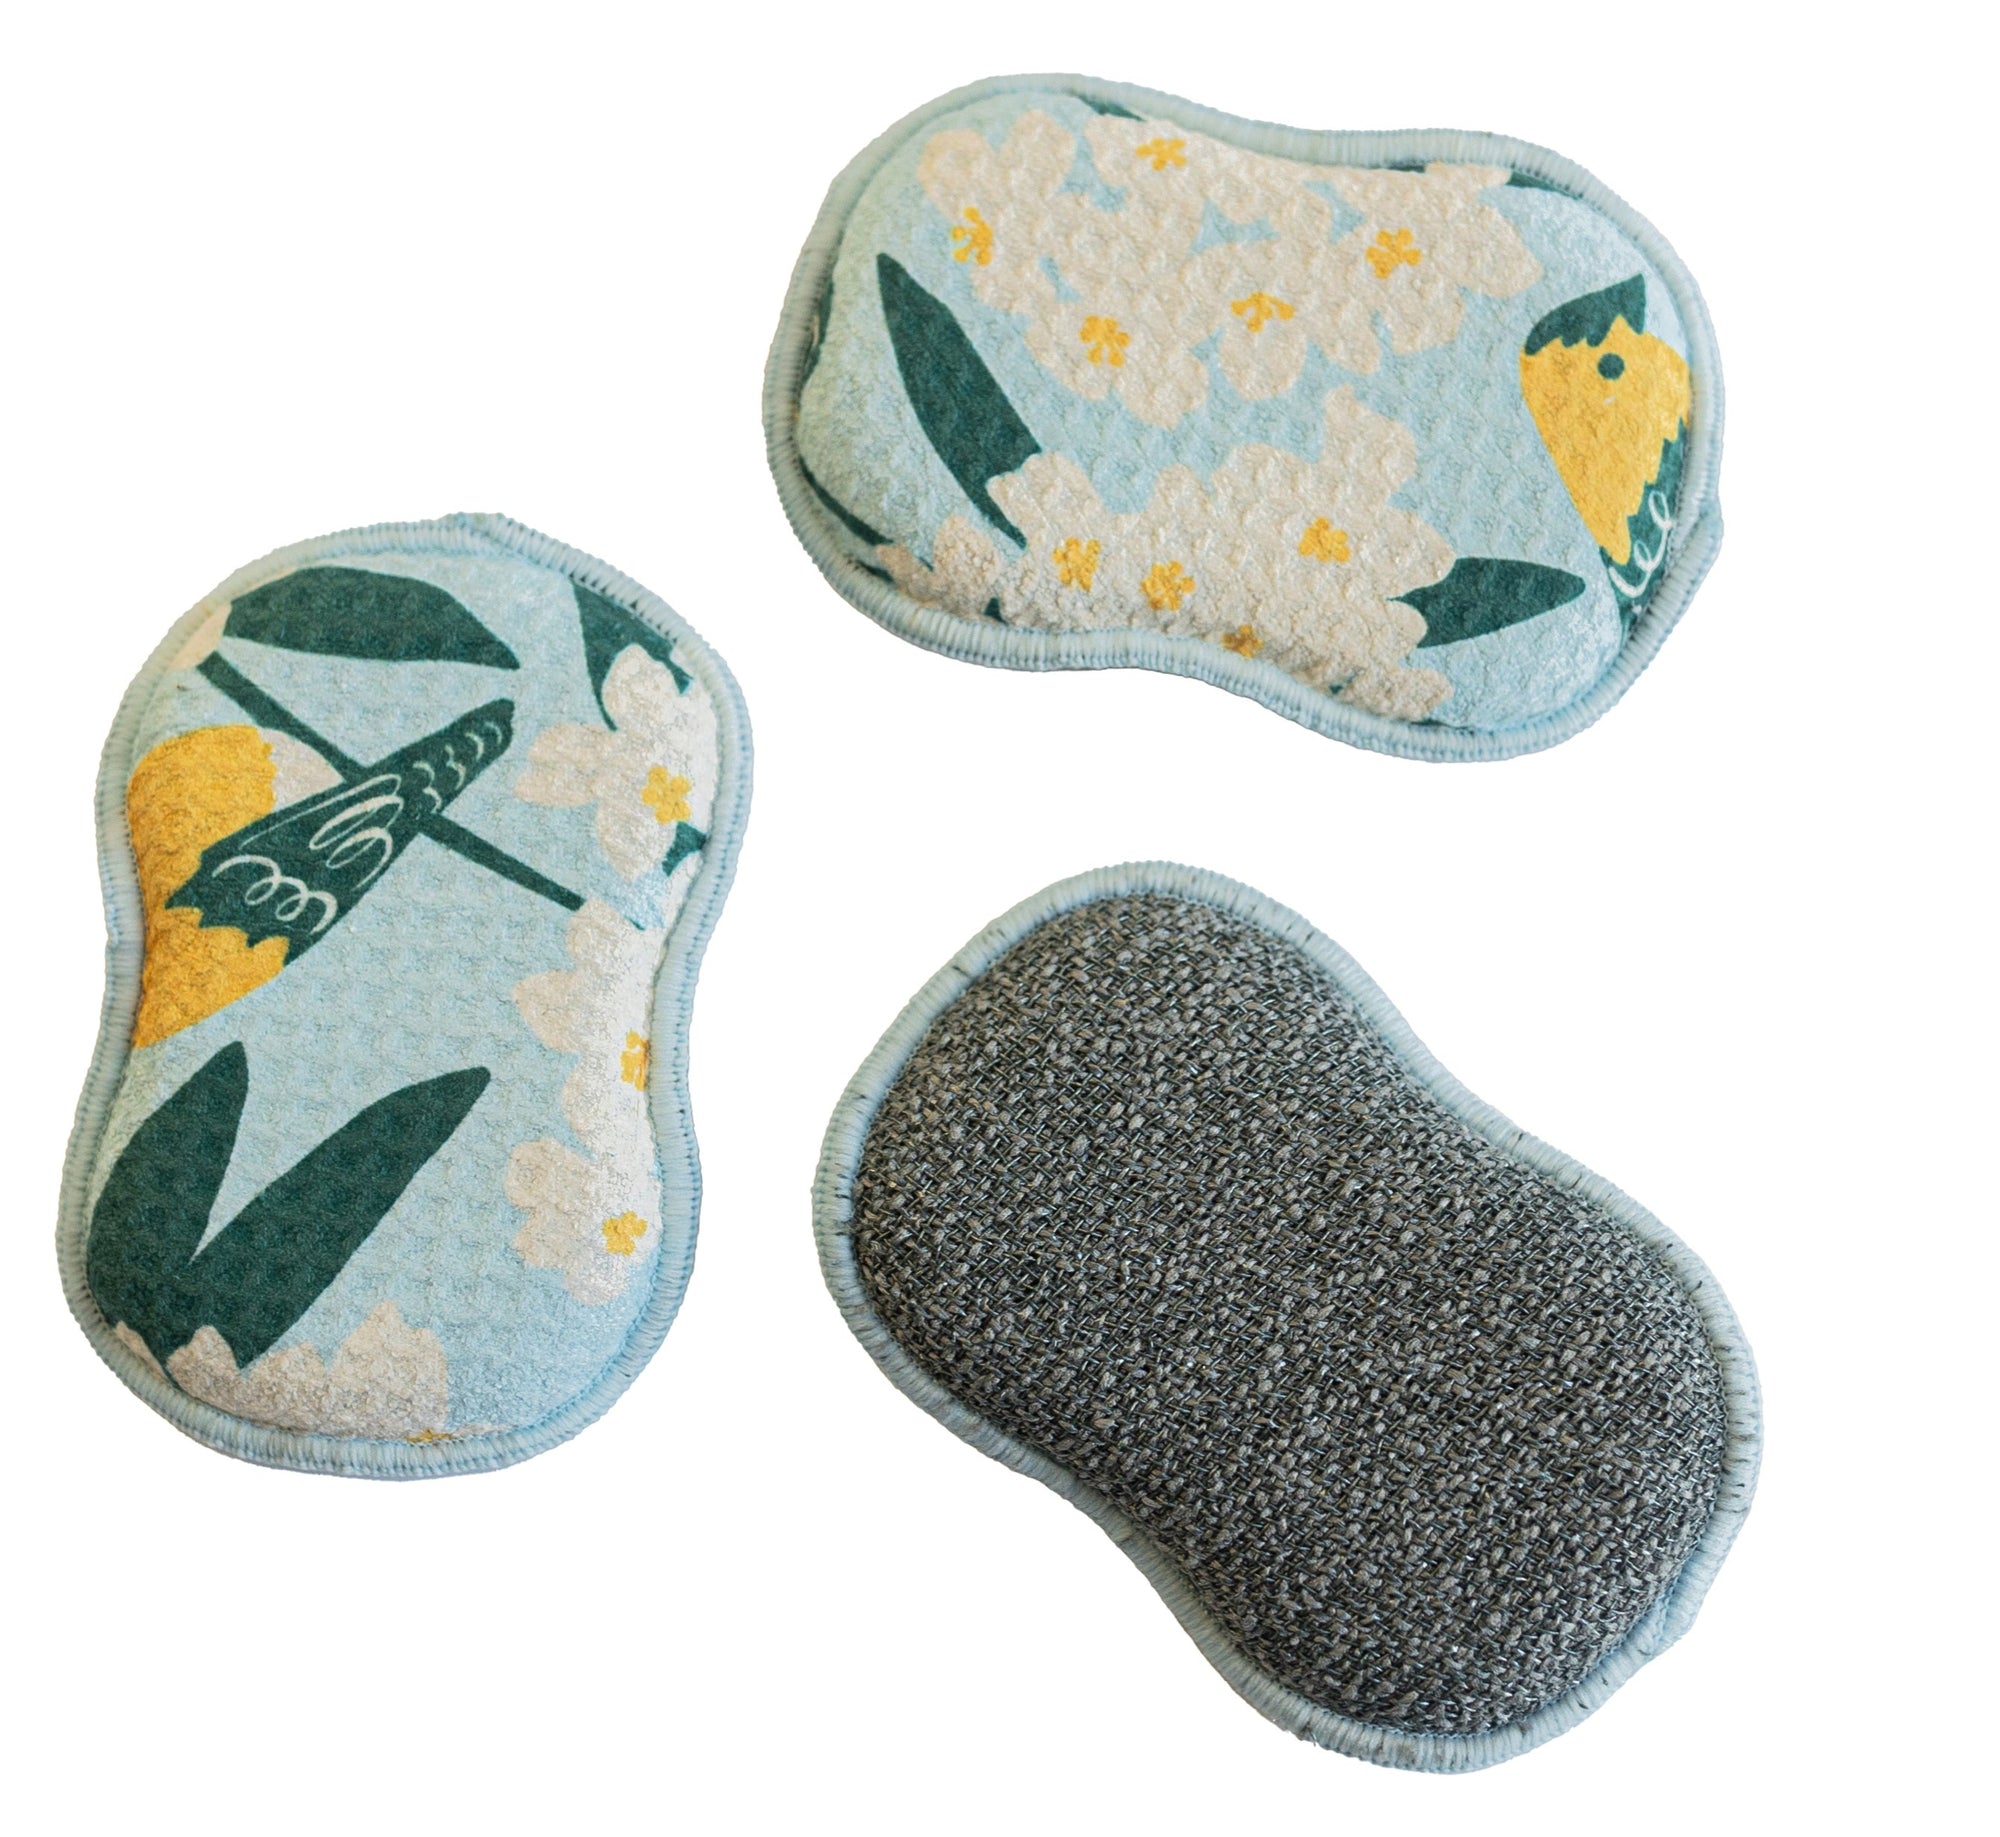 RE:usable Sponges (Set of 3) - Nuthatch Birdsong Sponges & Scouring Pads Once Again Home Co.   